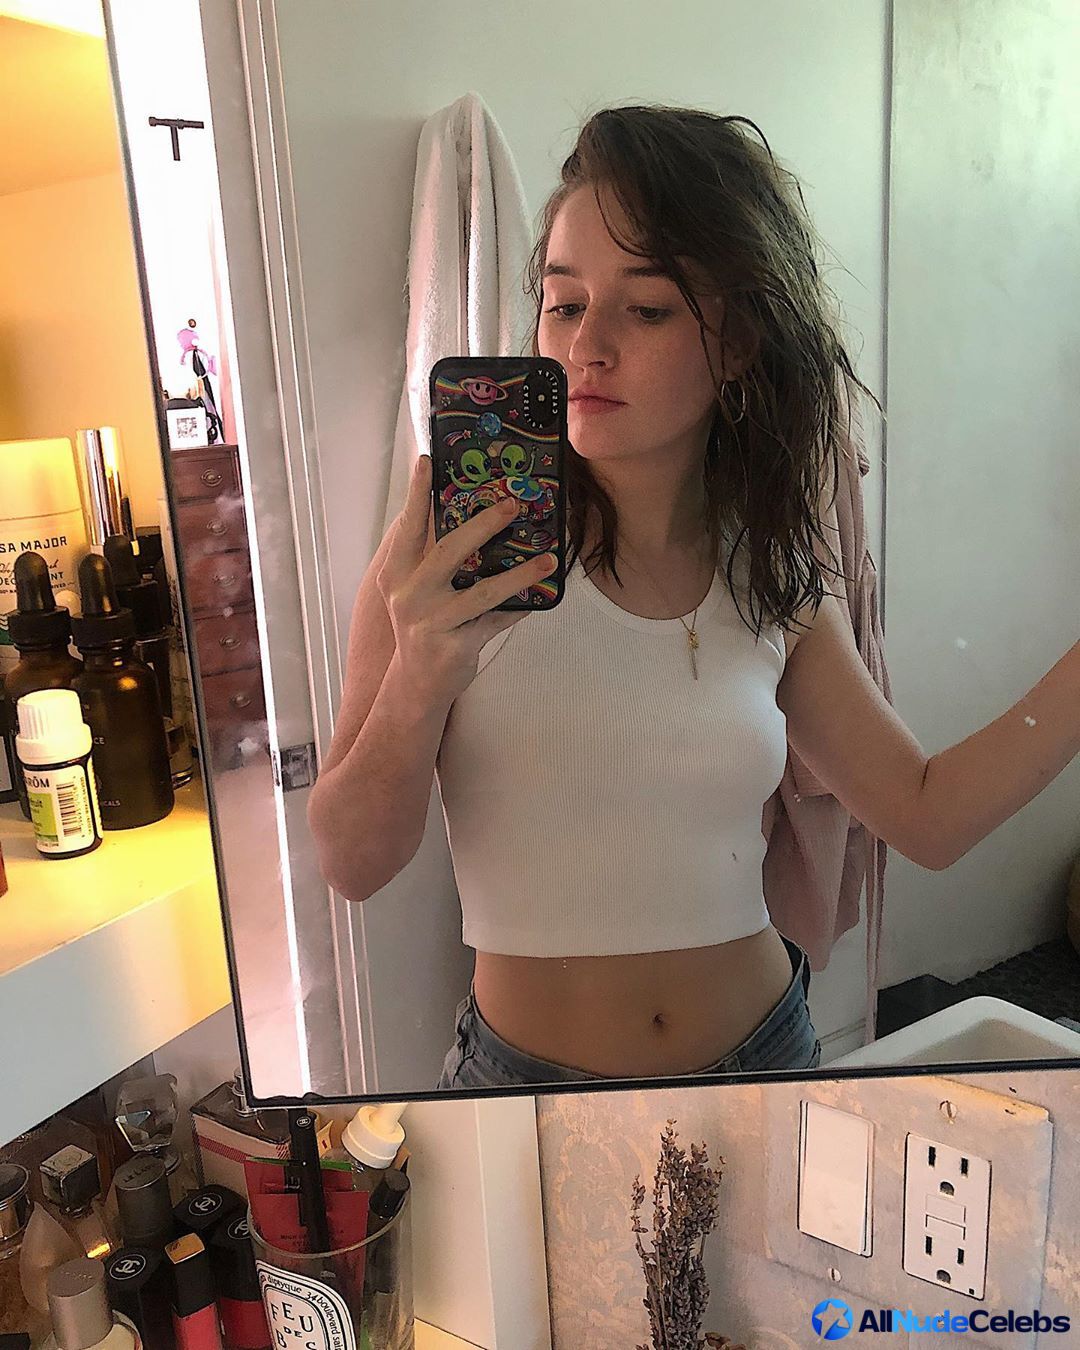 Judging by the photos, Kaitlyn Dever loves to show off her wonderful cleava...